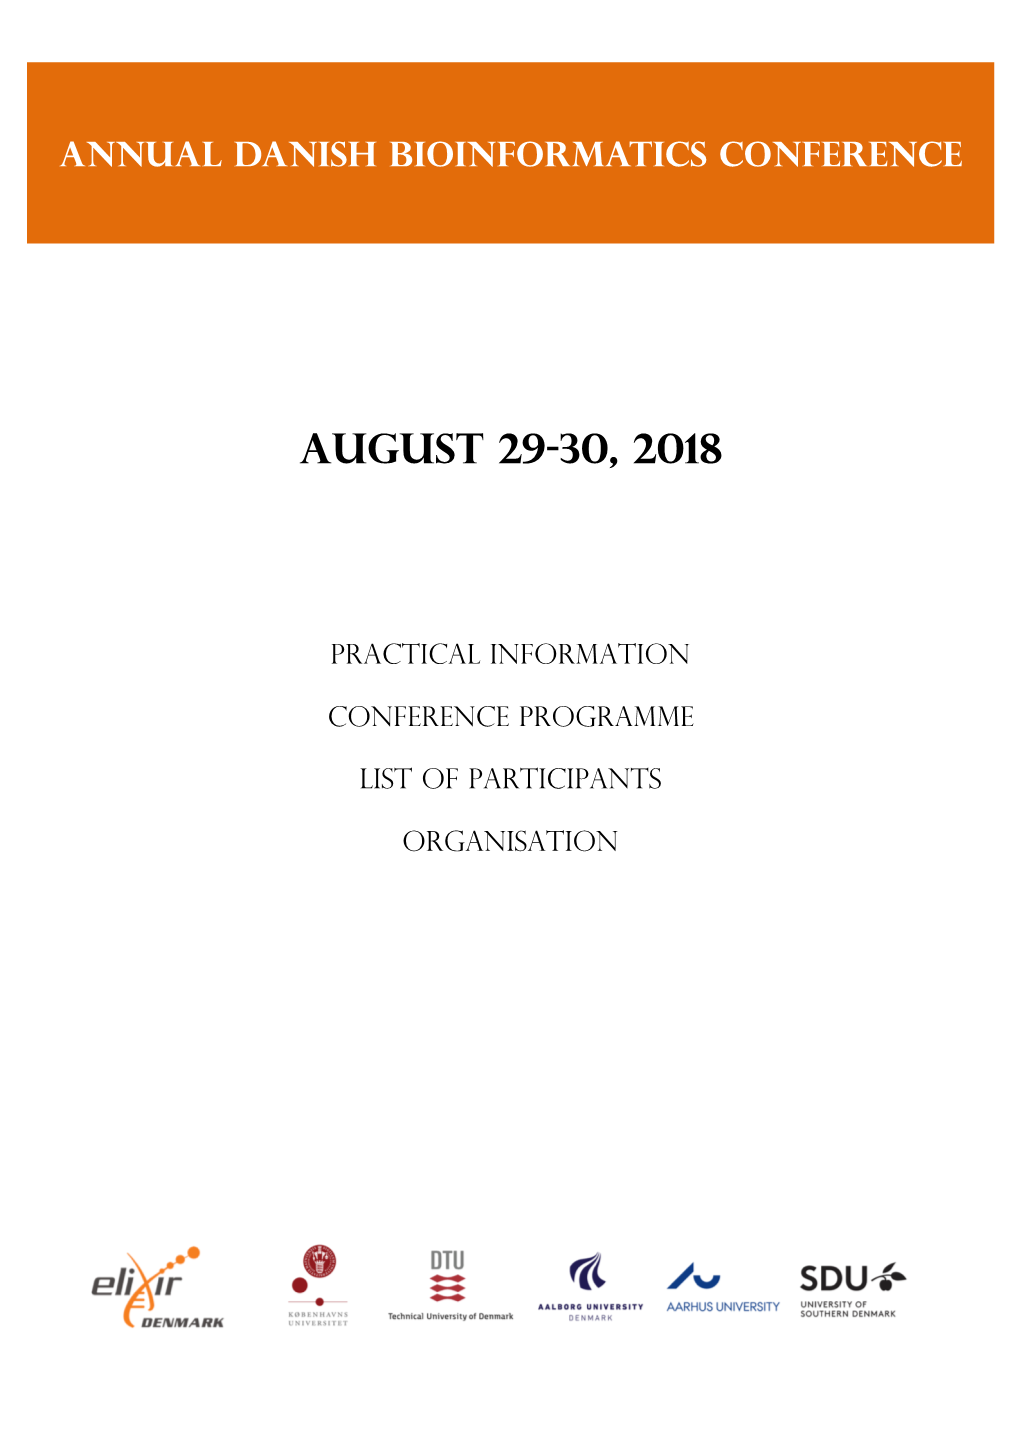 August 29-30, 2018